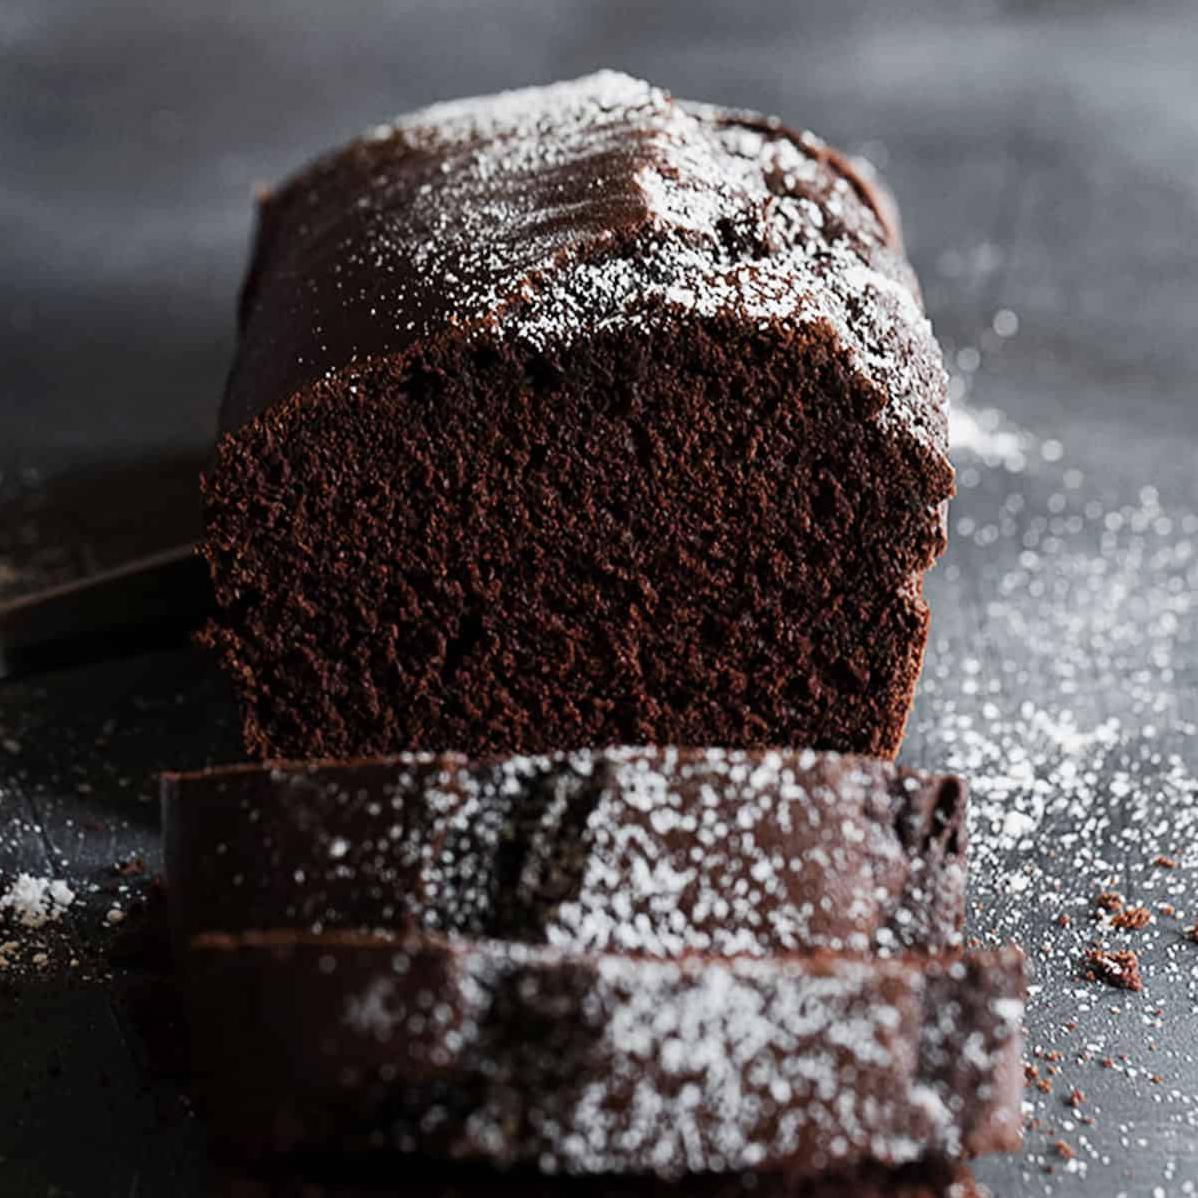  Looking for a guilt-free dessert? This light chocolate pound cake is your answer.